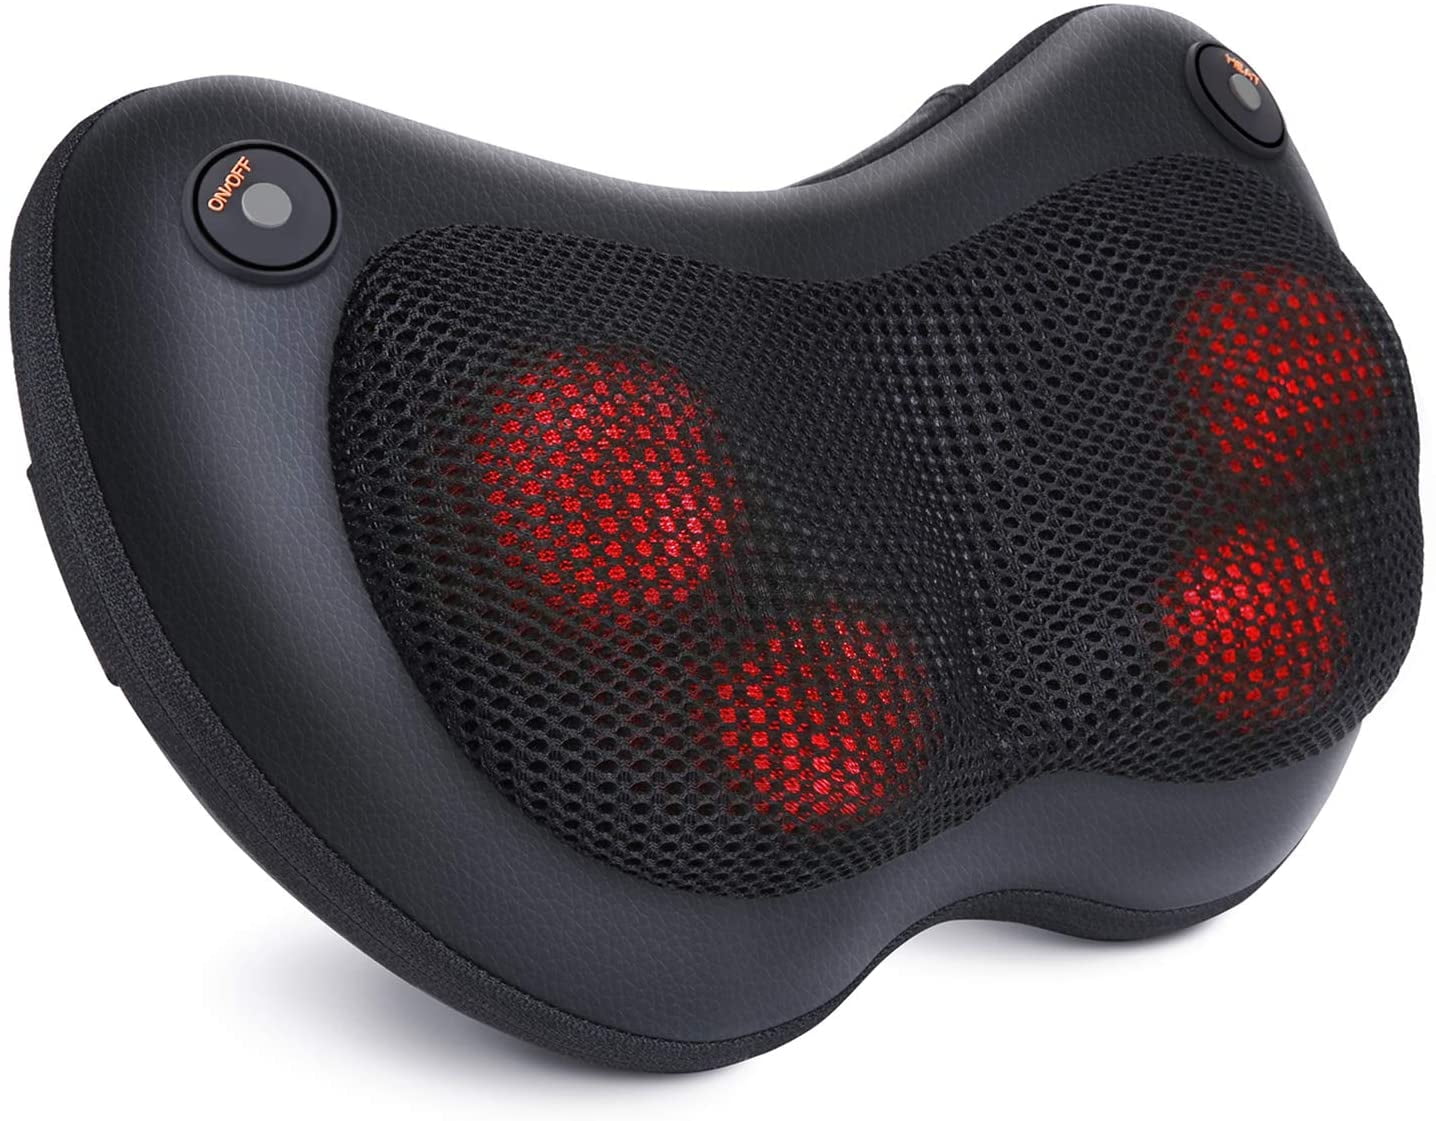 Back Massager,Neck Massager with heat, Back and Neck Massager Gifts for  Grandpa, Grandma, Teacher, Nurse, Christmas, Electric Shoulder Massager  Kneading Sore Muscles, Massage Pillow for Back Neck Pain Cloth Black